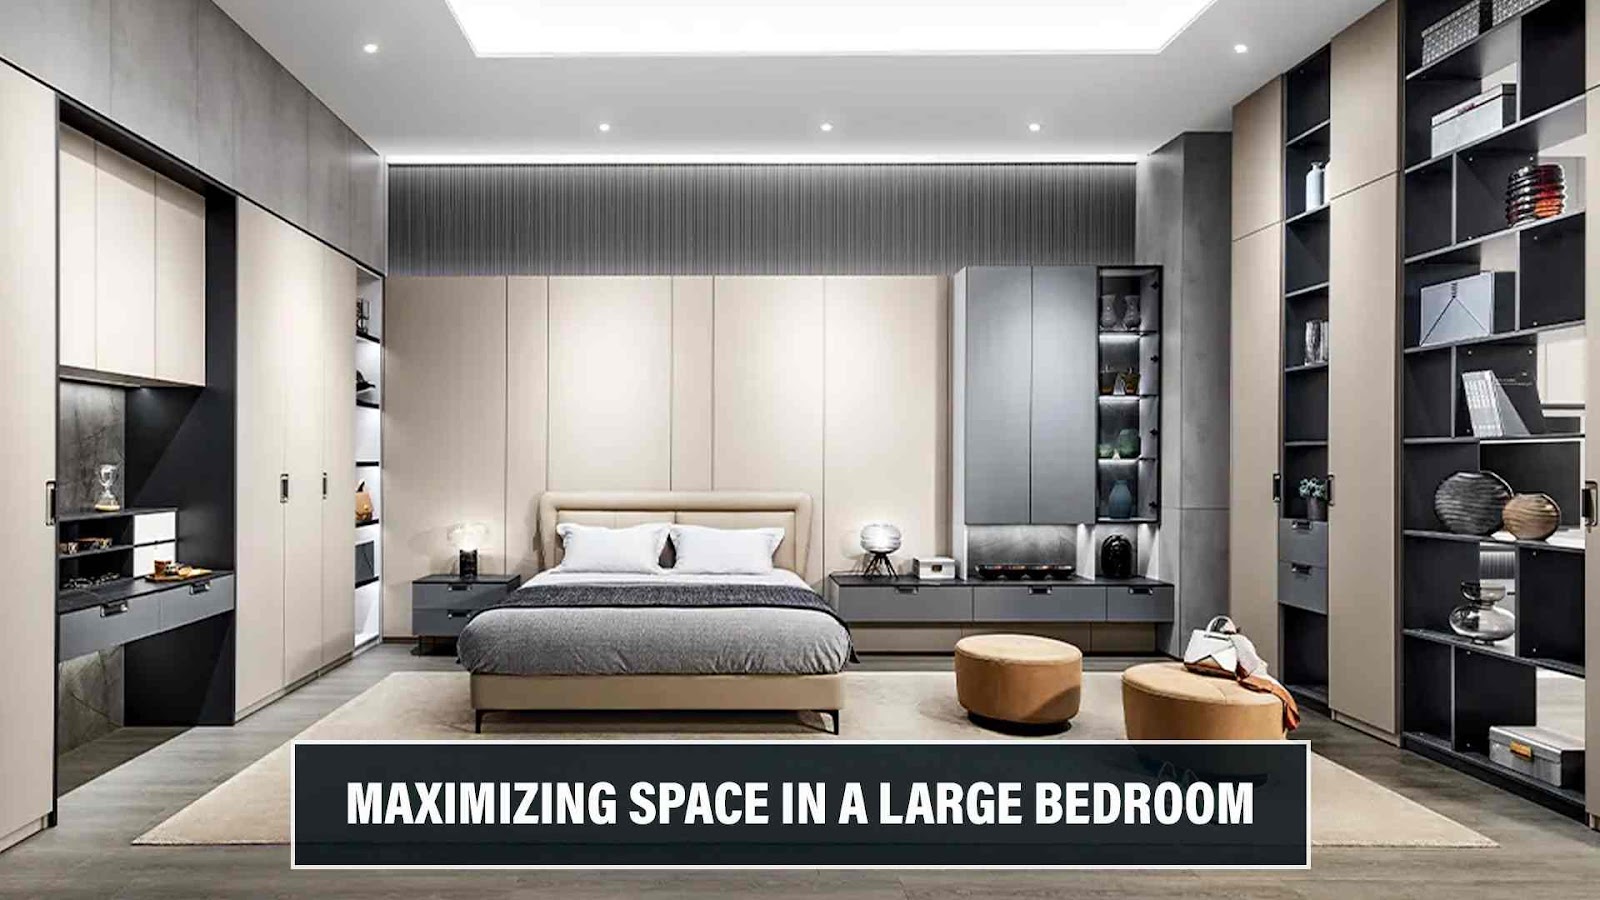 Maximizing Space in a Large Bedroom